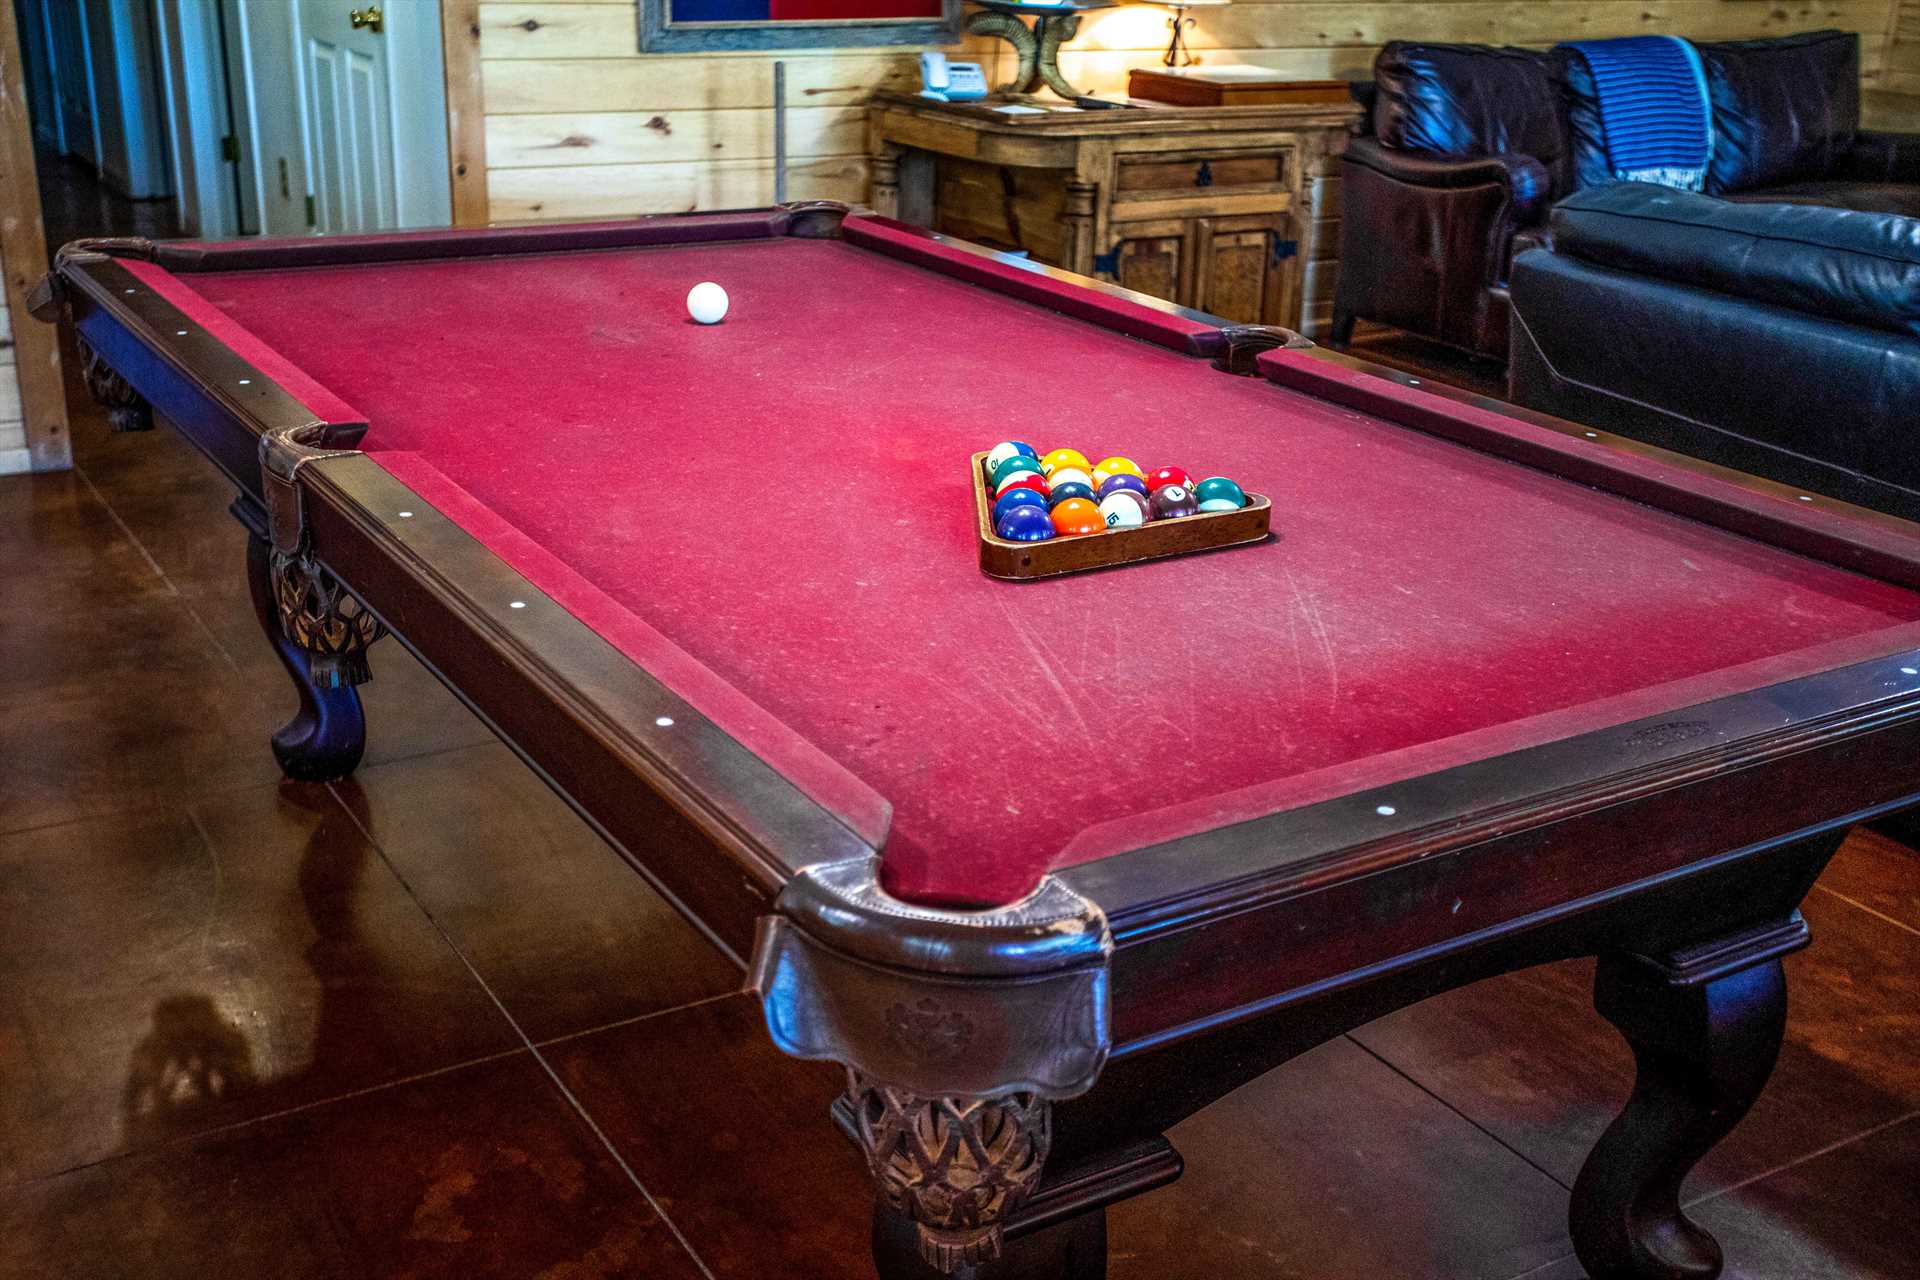                                                 Hone your billiards skills around this big and beautiful old-style drop-pocket pool table!